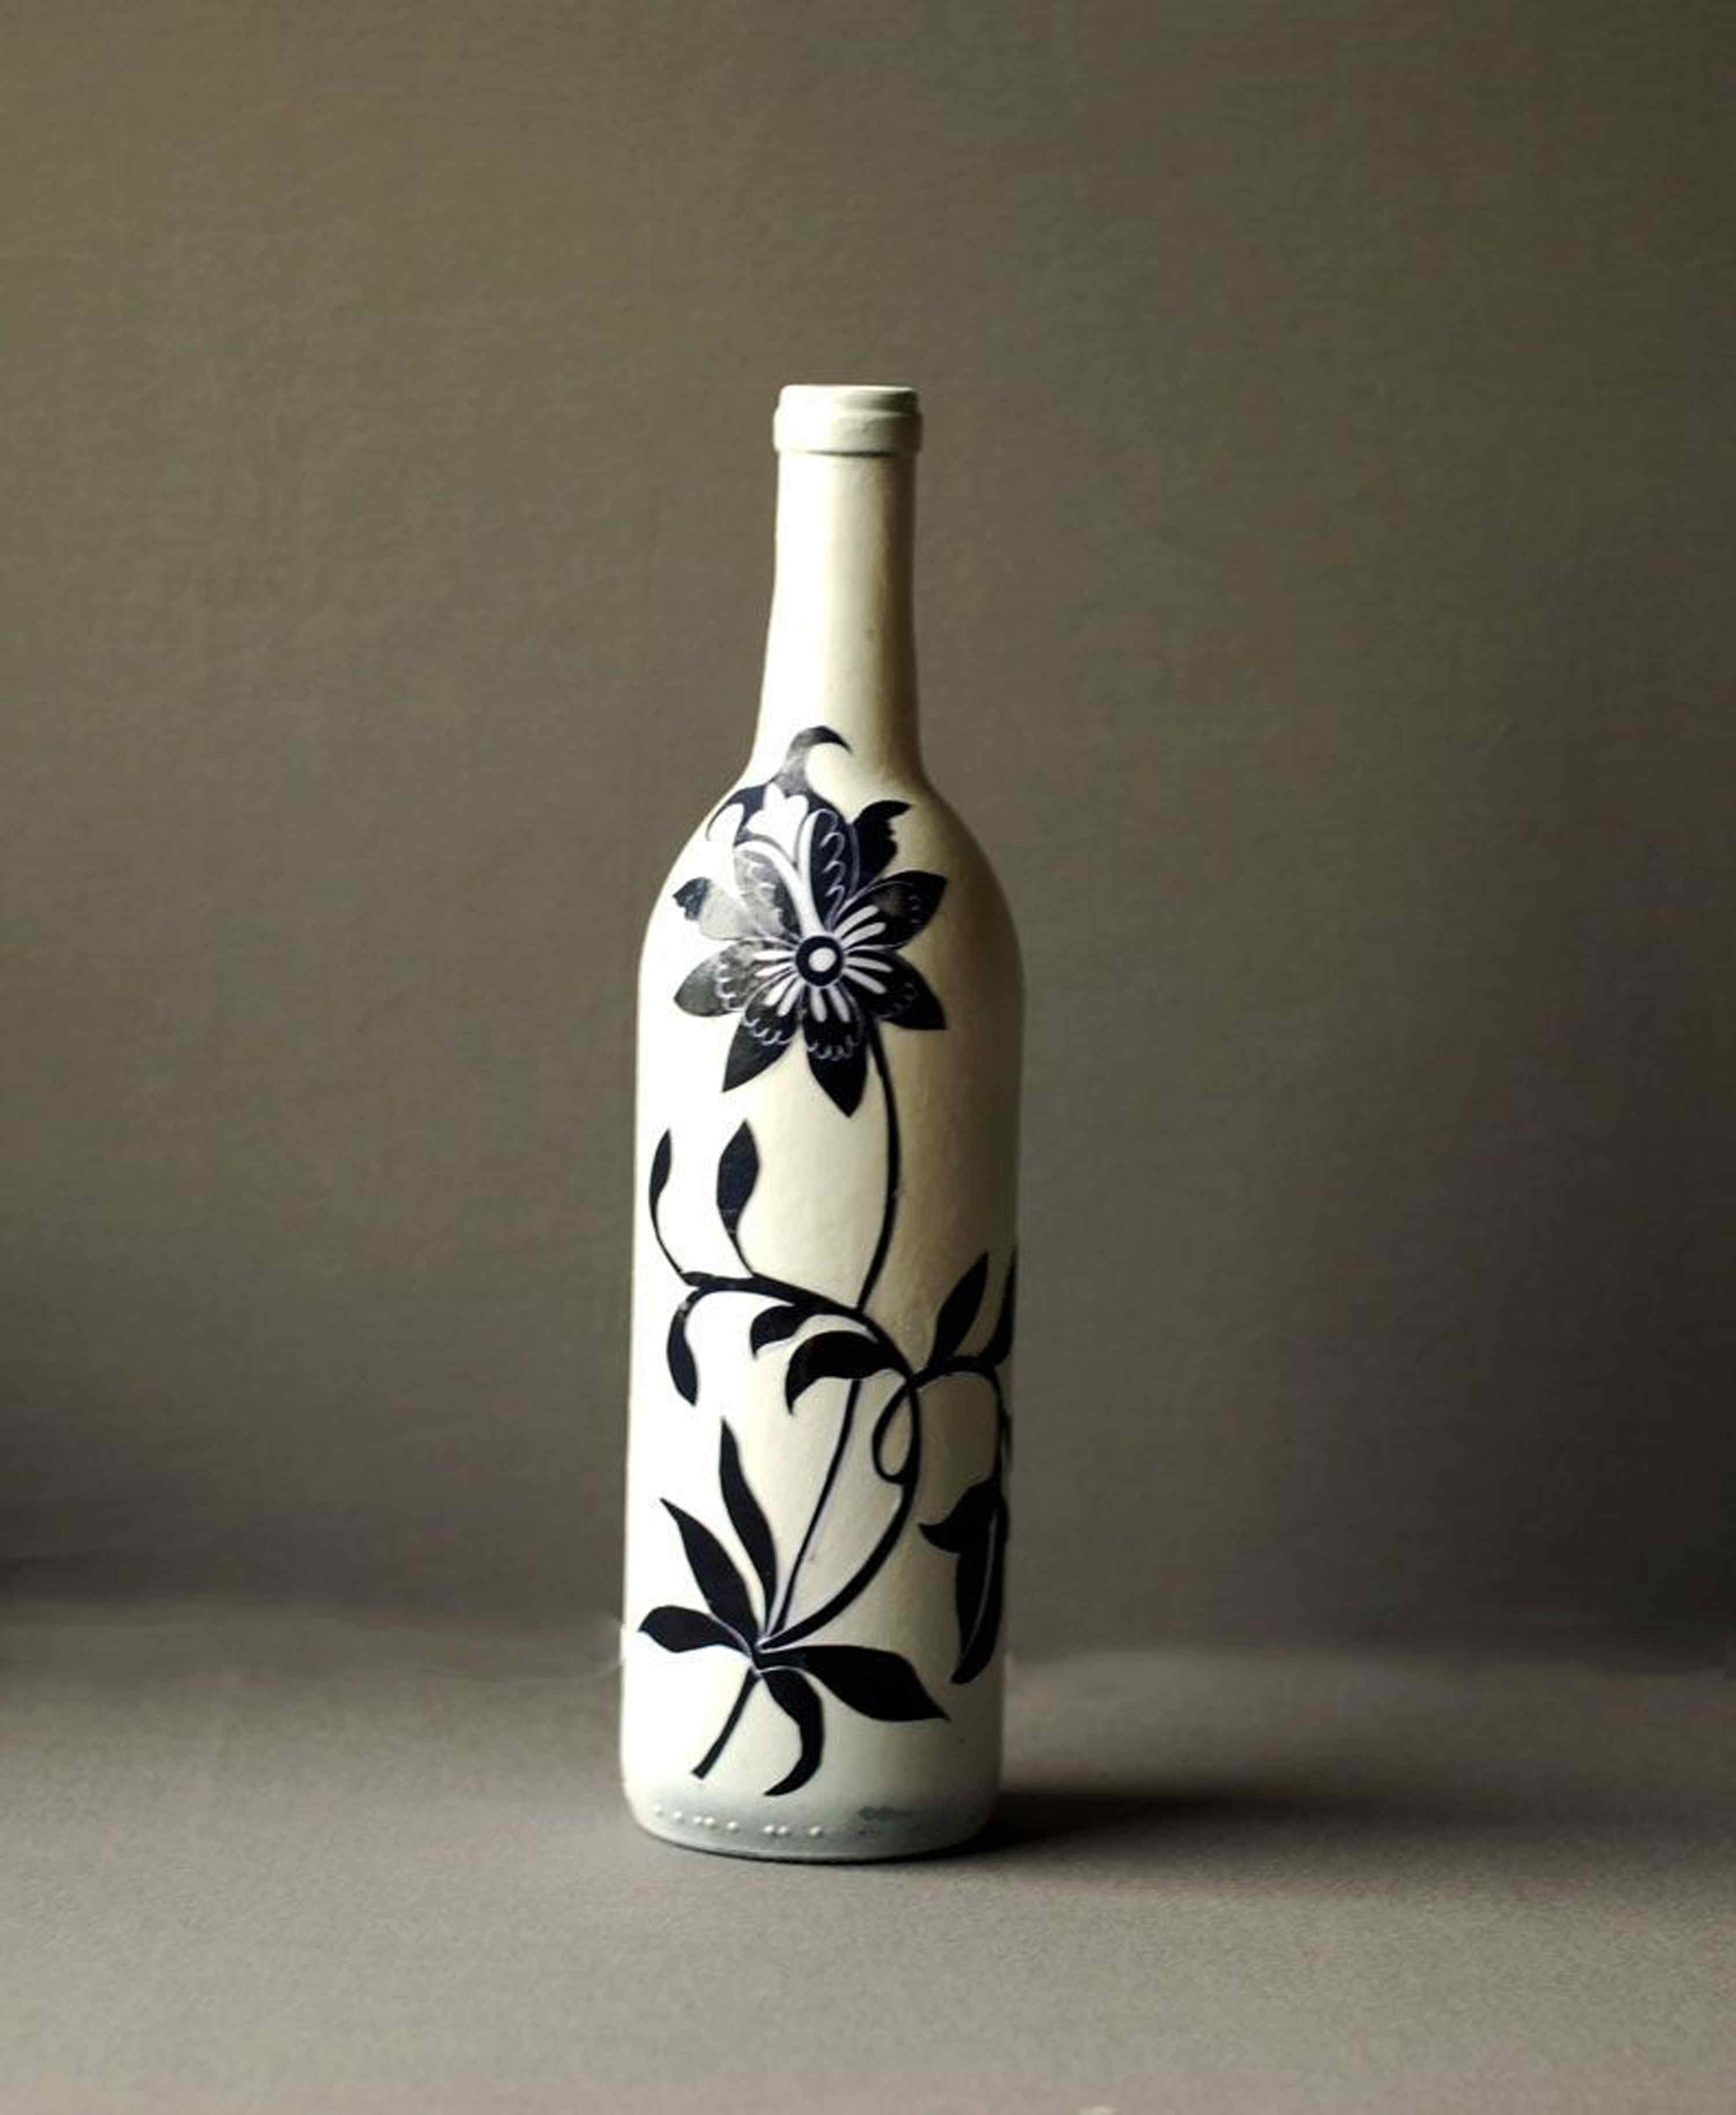 Paper Mache Vases for Sale Of asian Style Recycled Decoupage Wine Bottle Craft within Decoupaged Wine Bottle 58bcb5685f9b58af5cc40cbb